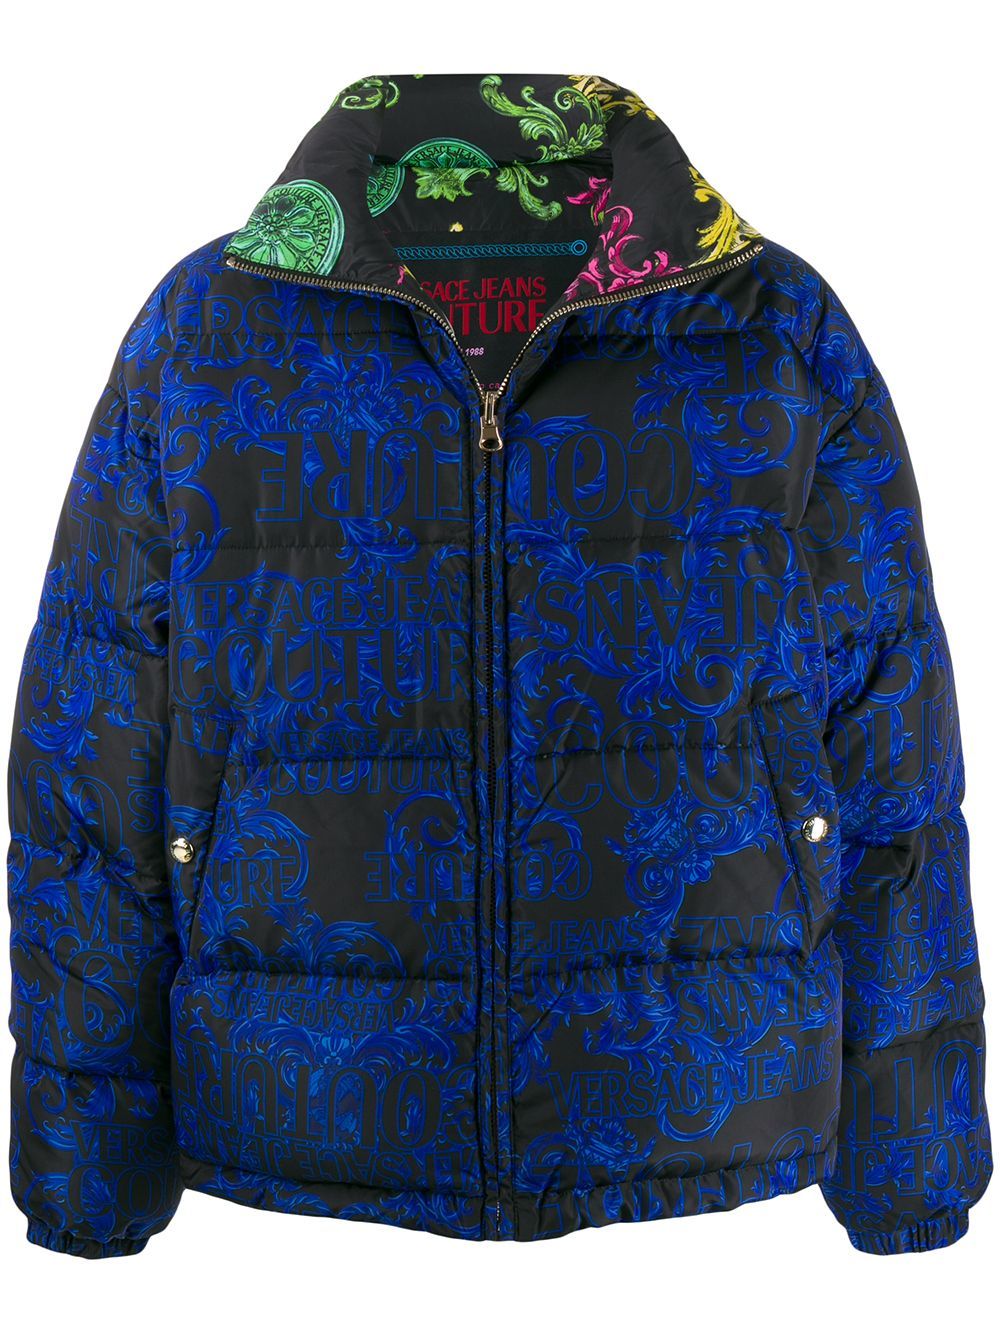 VERSACE JEANS COUTURE Baroque Print Reversible Puffer Coat, $779 ...